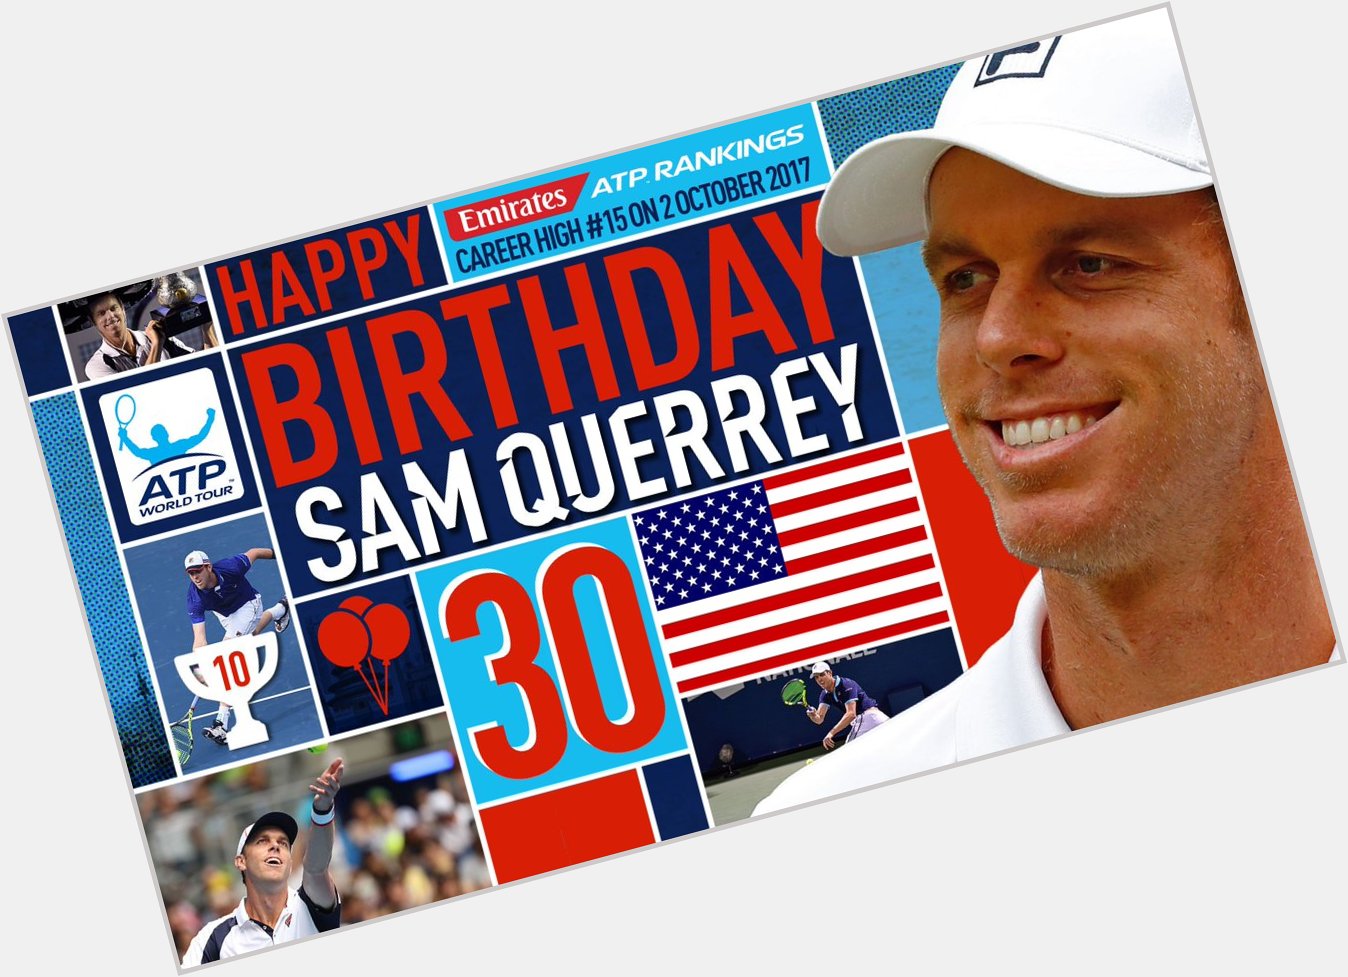  time for The  turns 3 0 today. Happy Birthday, Sam! 

Profile  